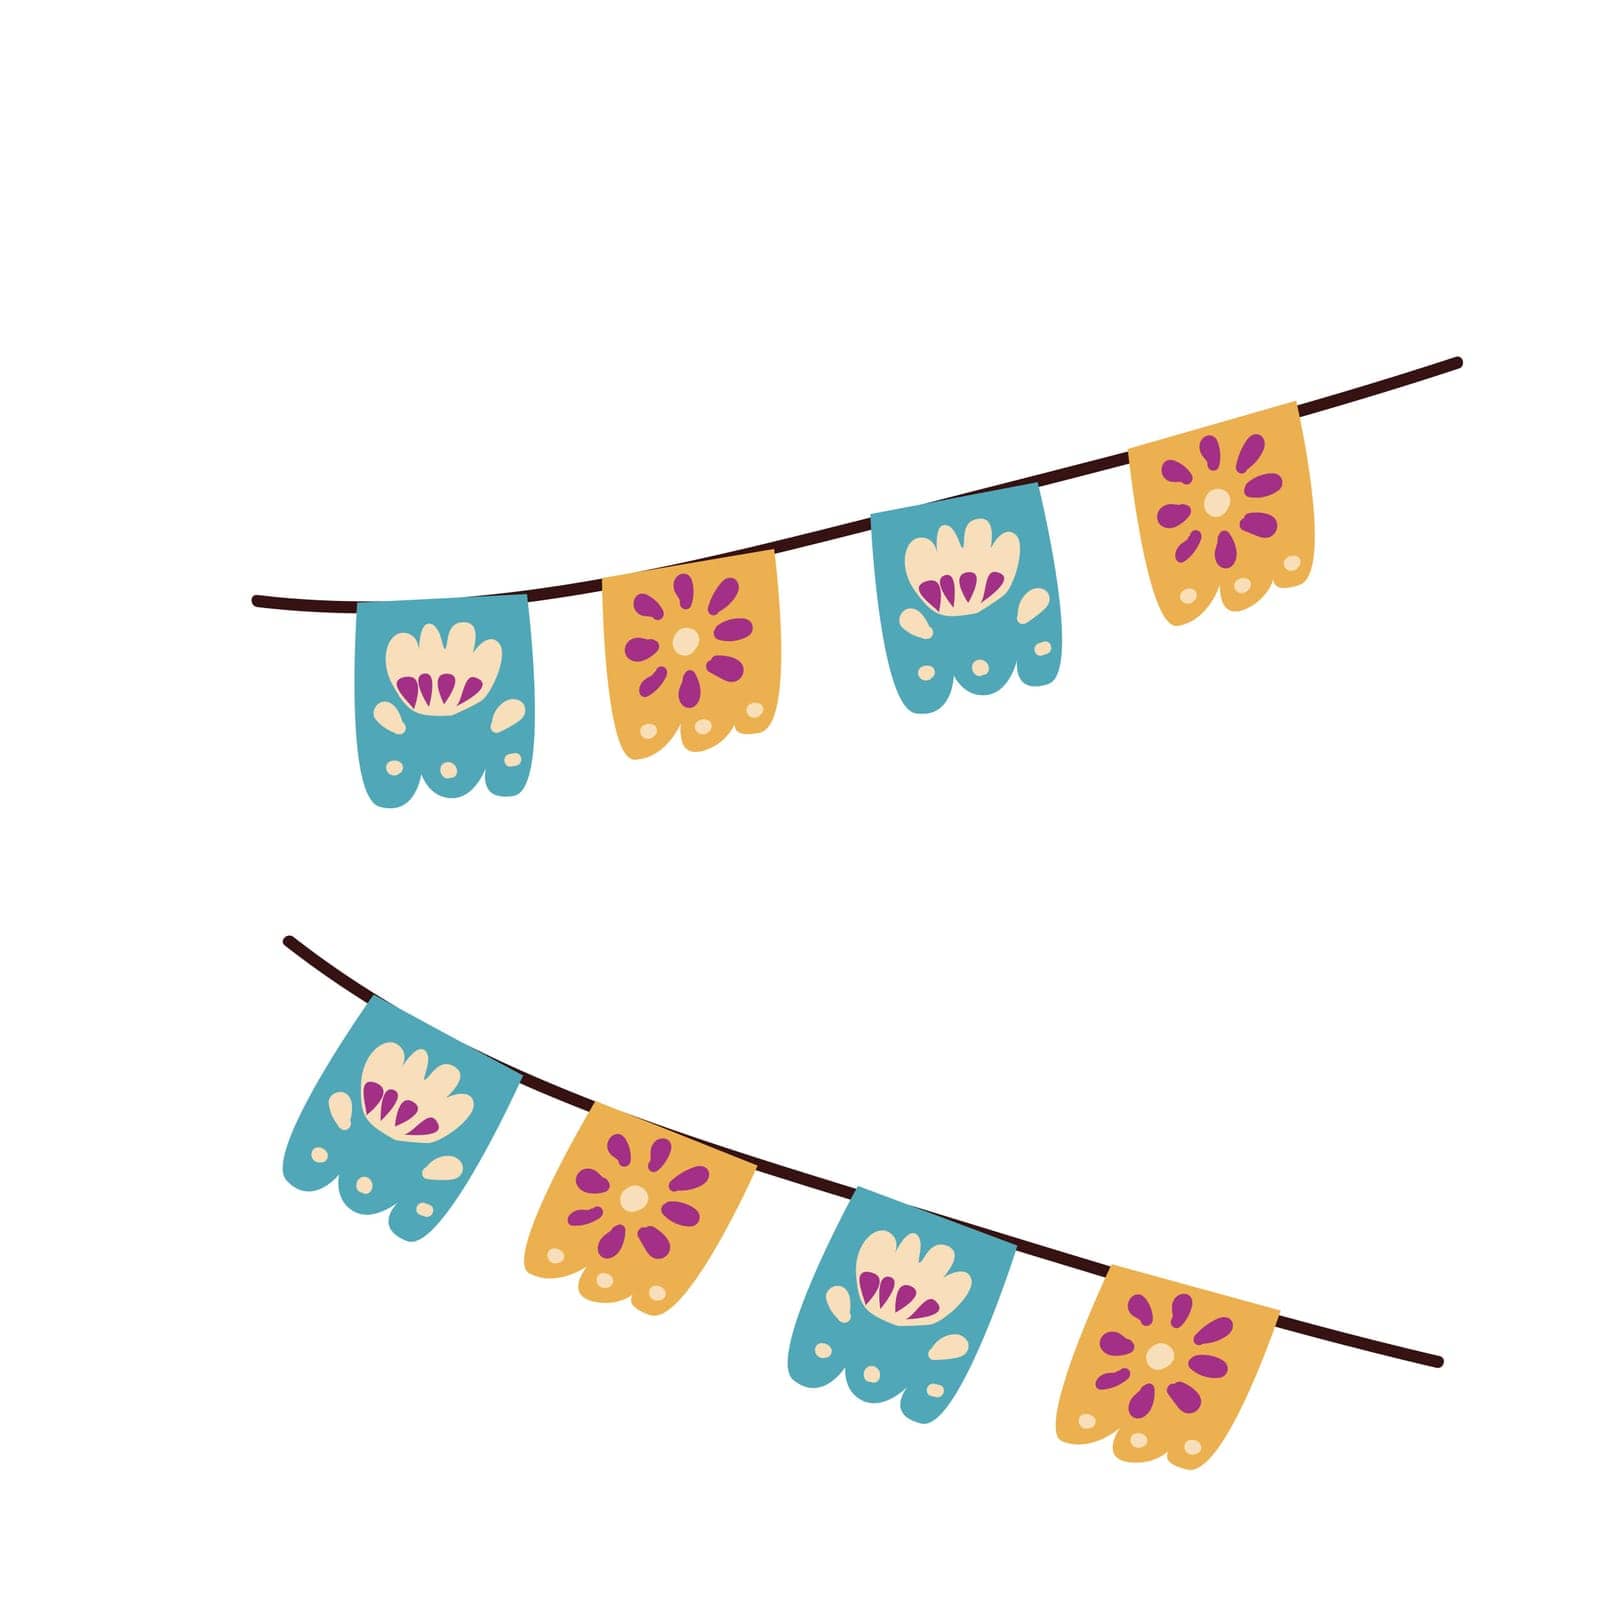 Mexican bunting for celebration design by Bissekeyeva